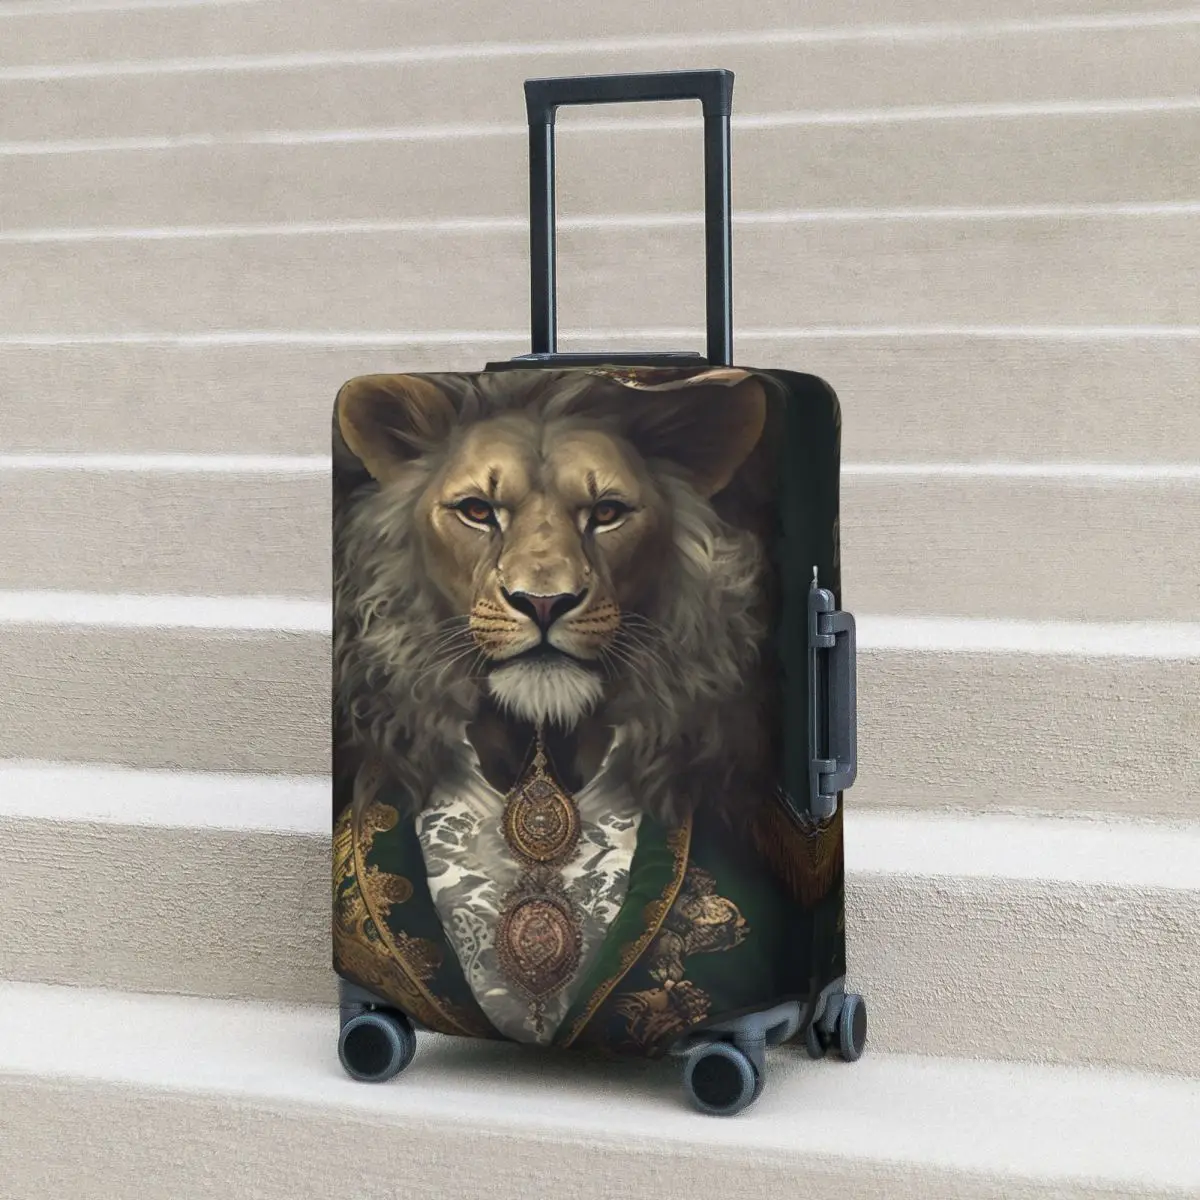 

Lion Suitcase Cover Dadaism Dapper Clothing Flight Cruise Trip Elastic Luggage Supplies Protector